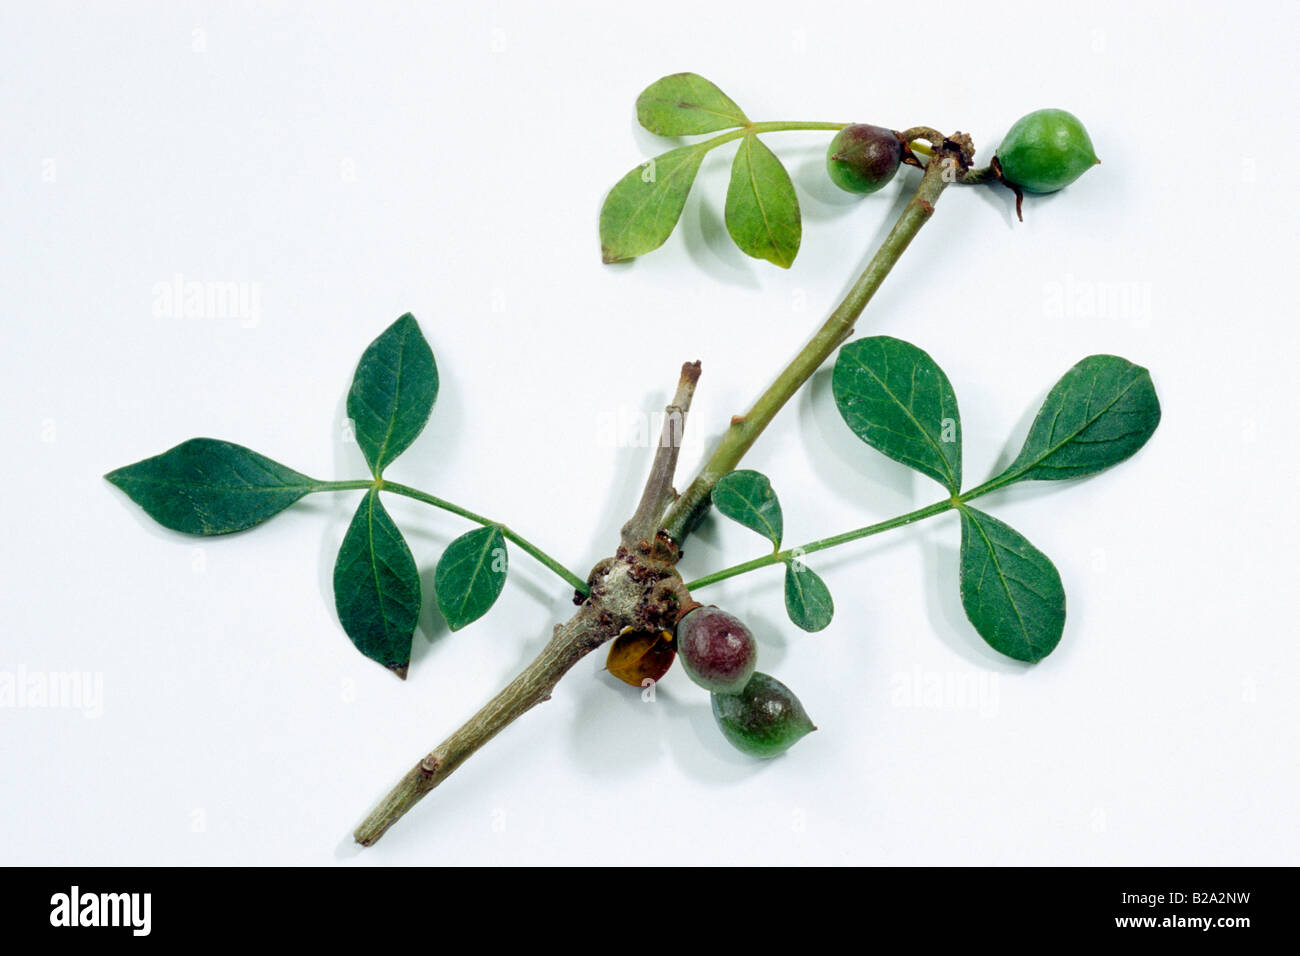 Abyssinian Myrrh (Commiphora abyssinica), twig with leaves, twig with leaves, studio picture Stock Photo